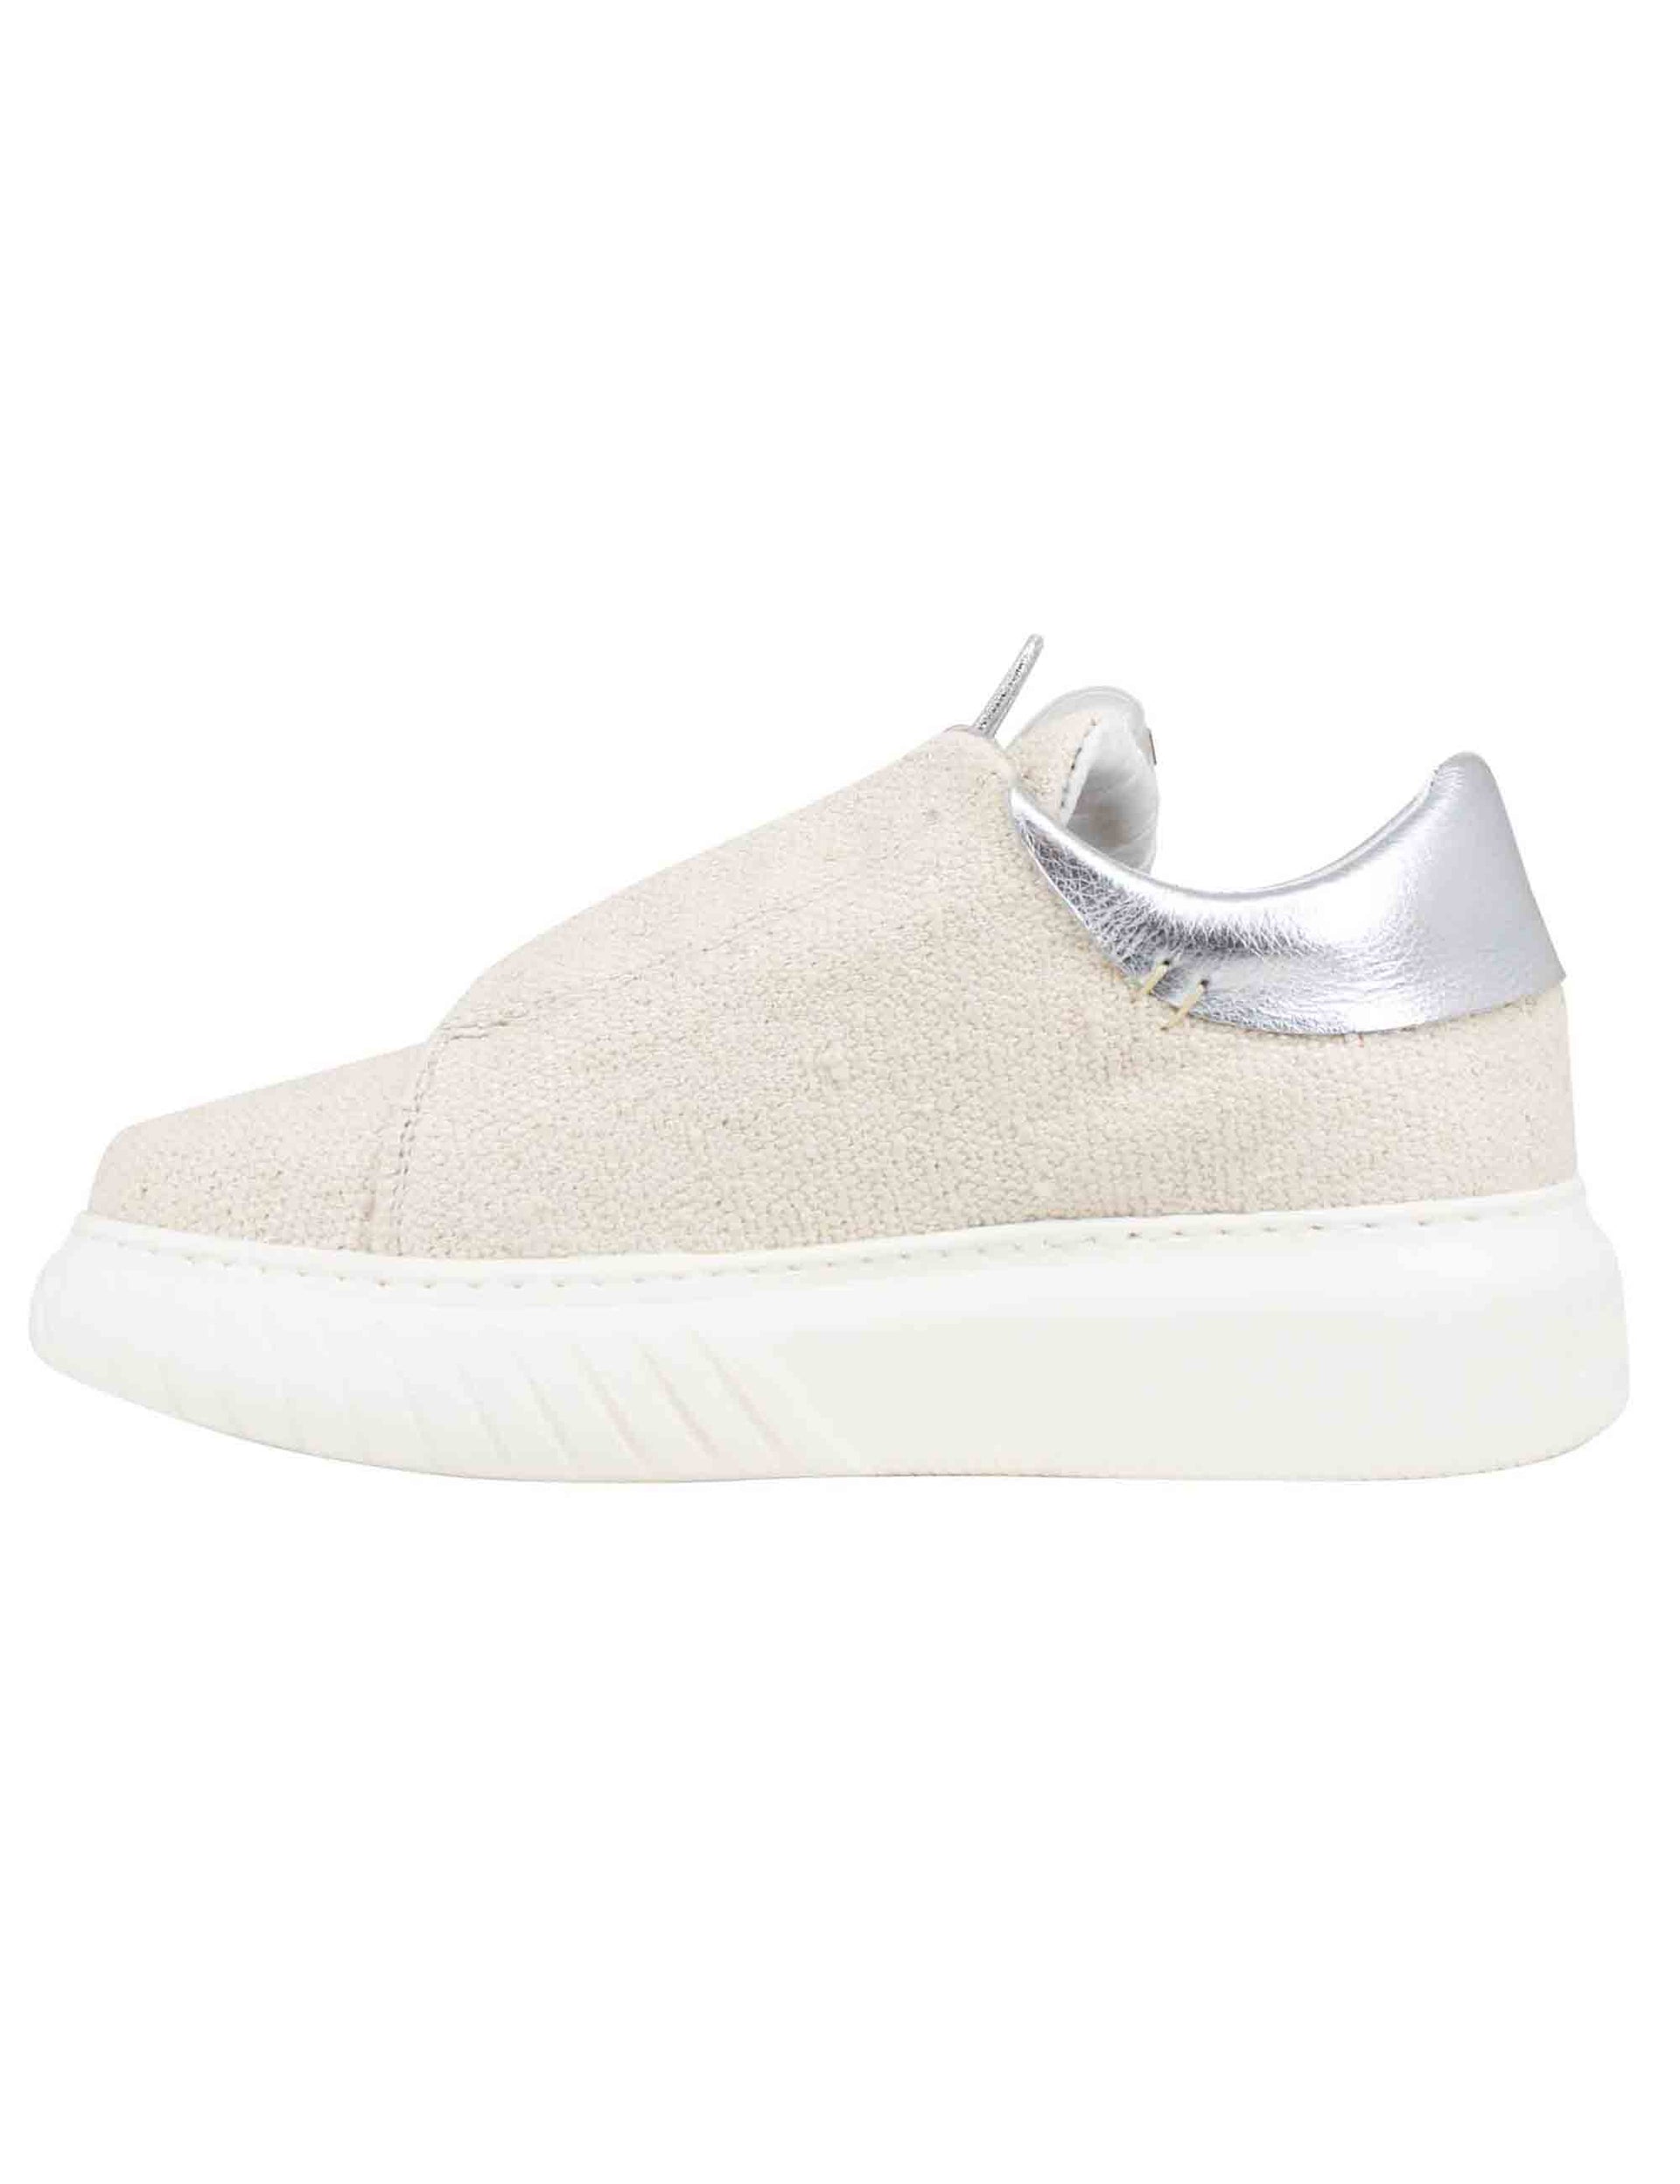 Women's sneakers in beige fabric with high rubber sole